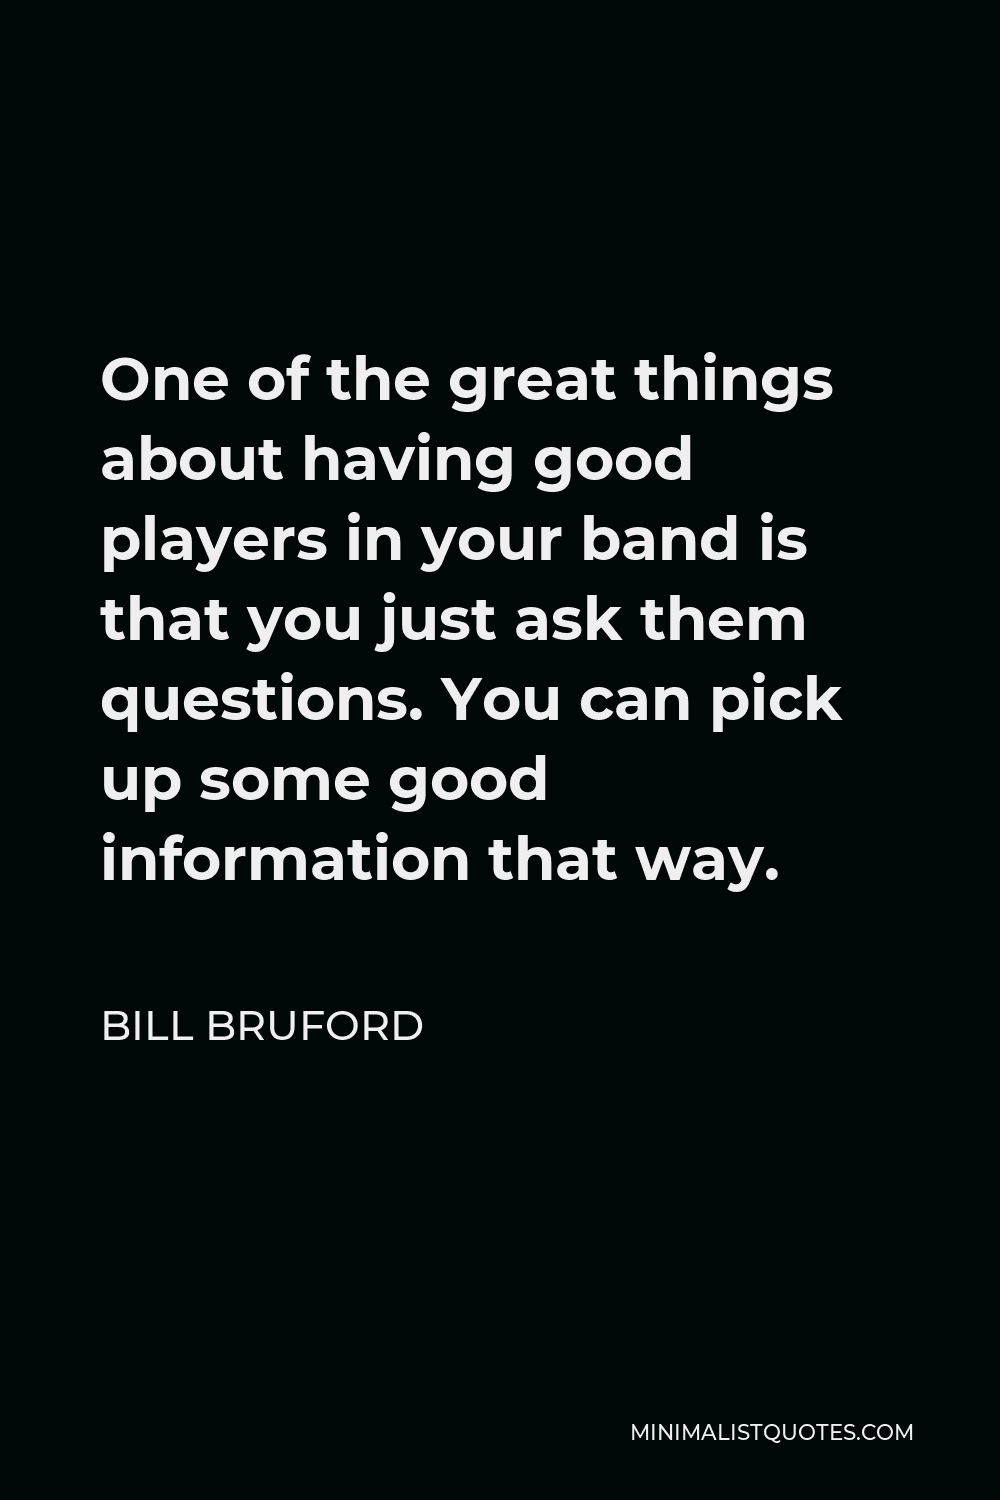 Bill Bruford Quote - One of the great things about having good players in your band is that you just ask them questions. You can pick up some good information that way.